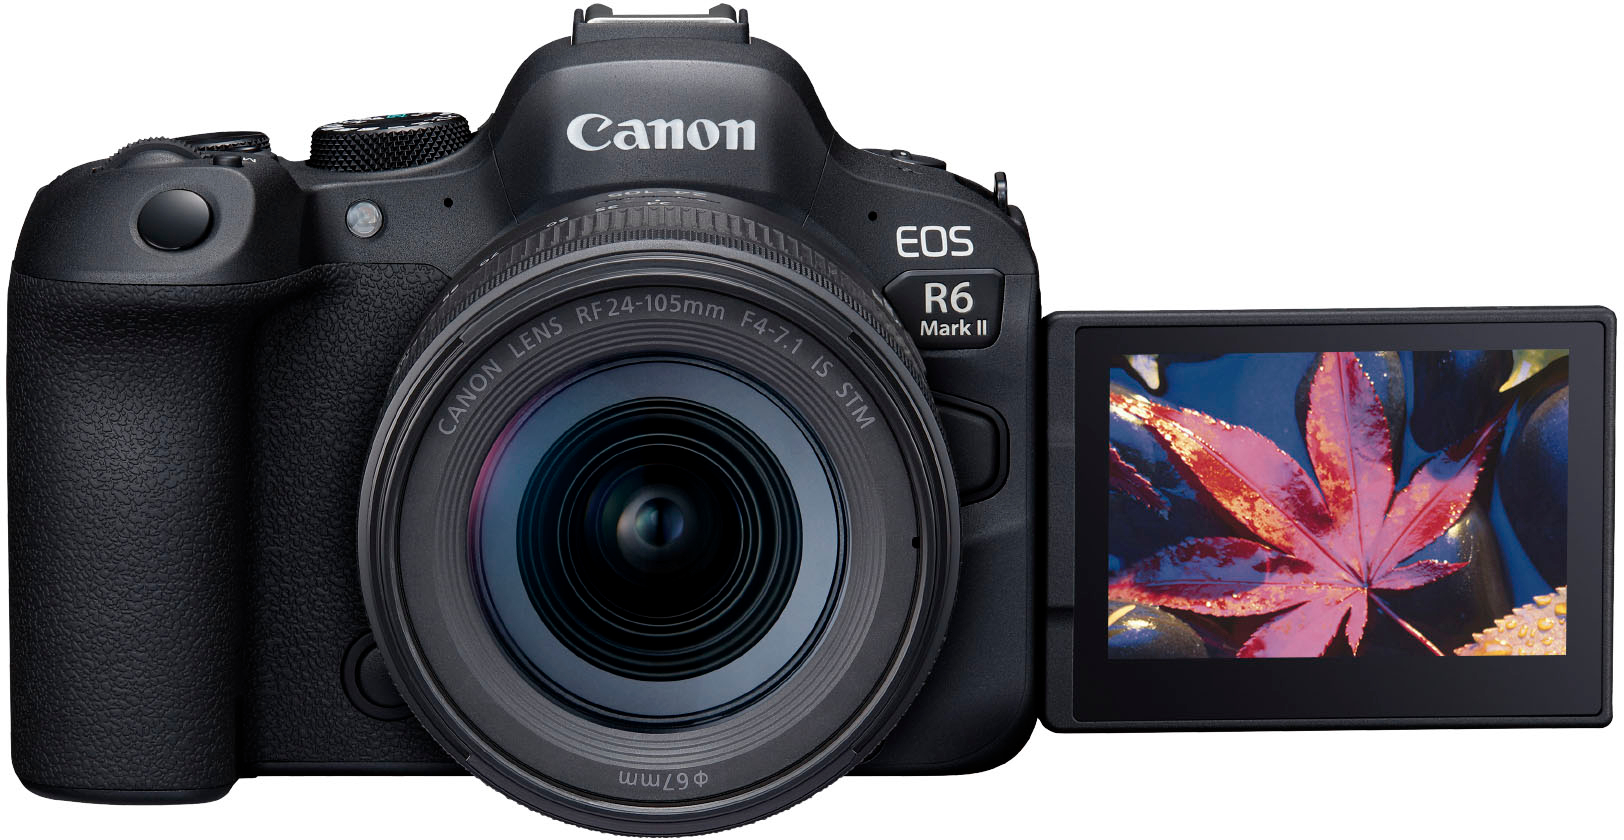 Canon EOS R6, an exceptional mirrorless camera for wildlife photography